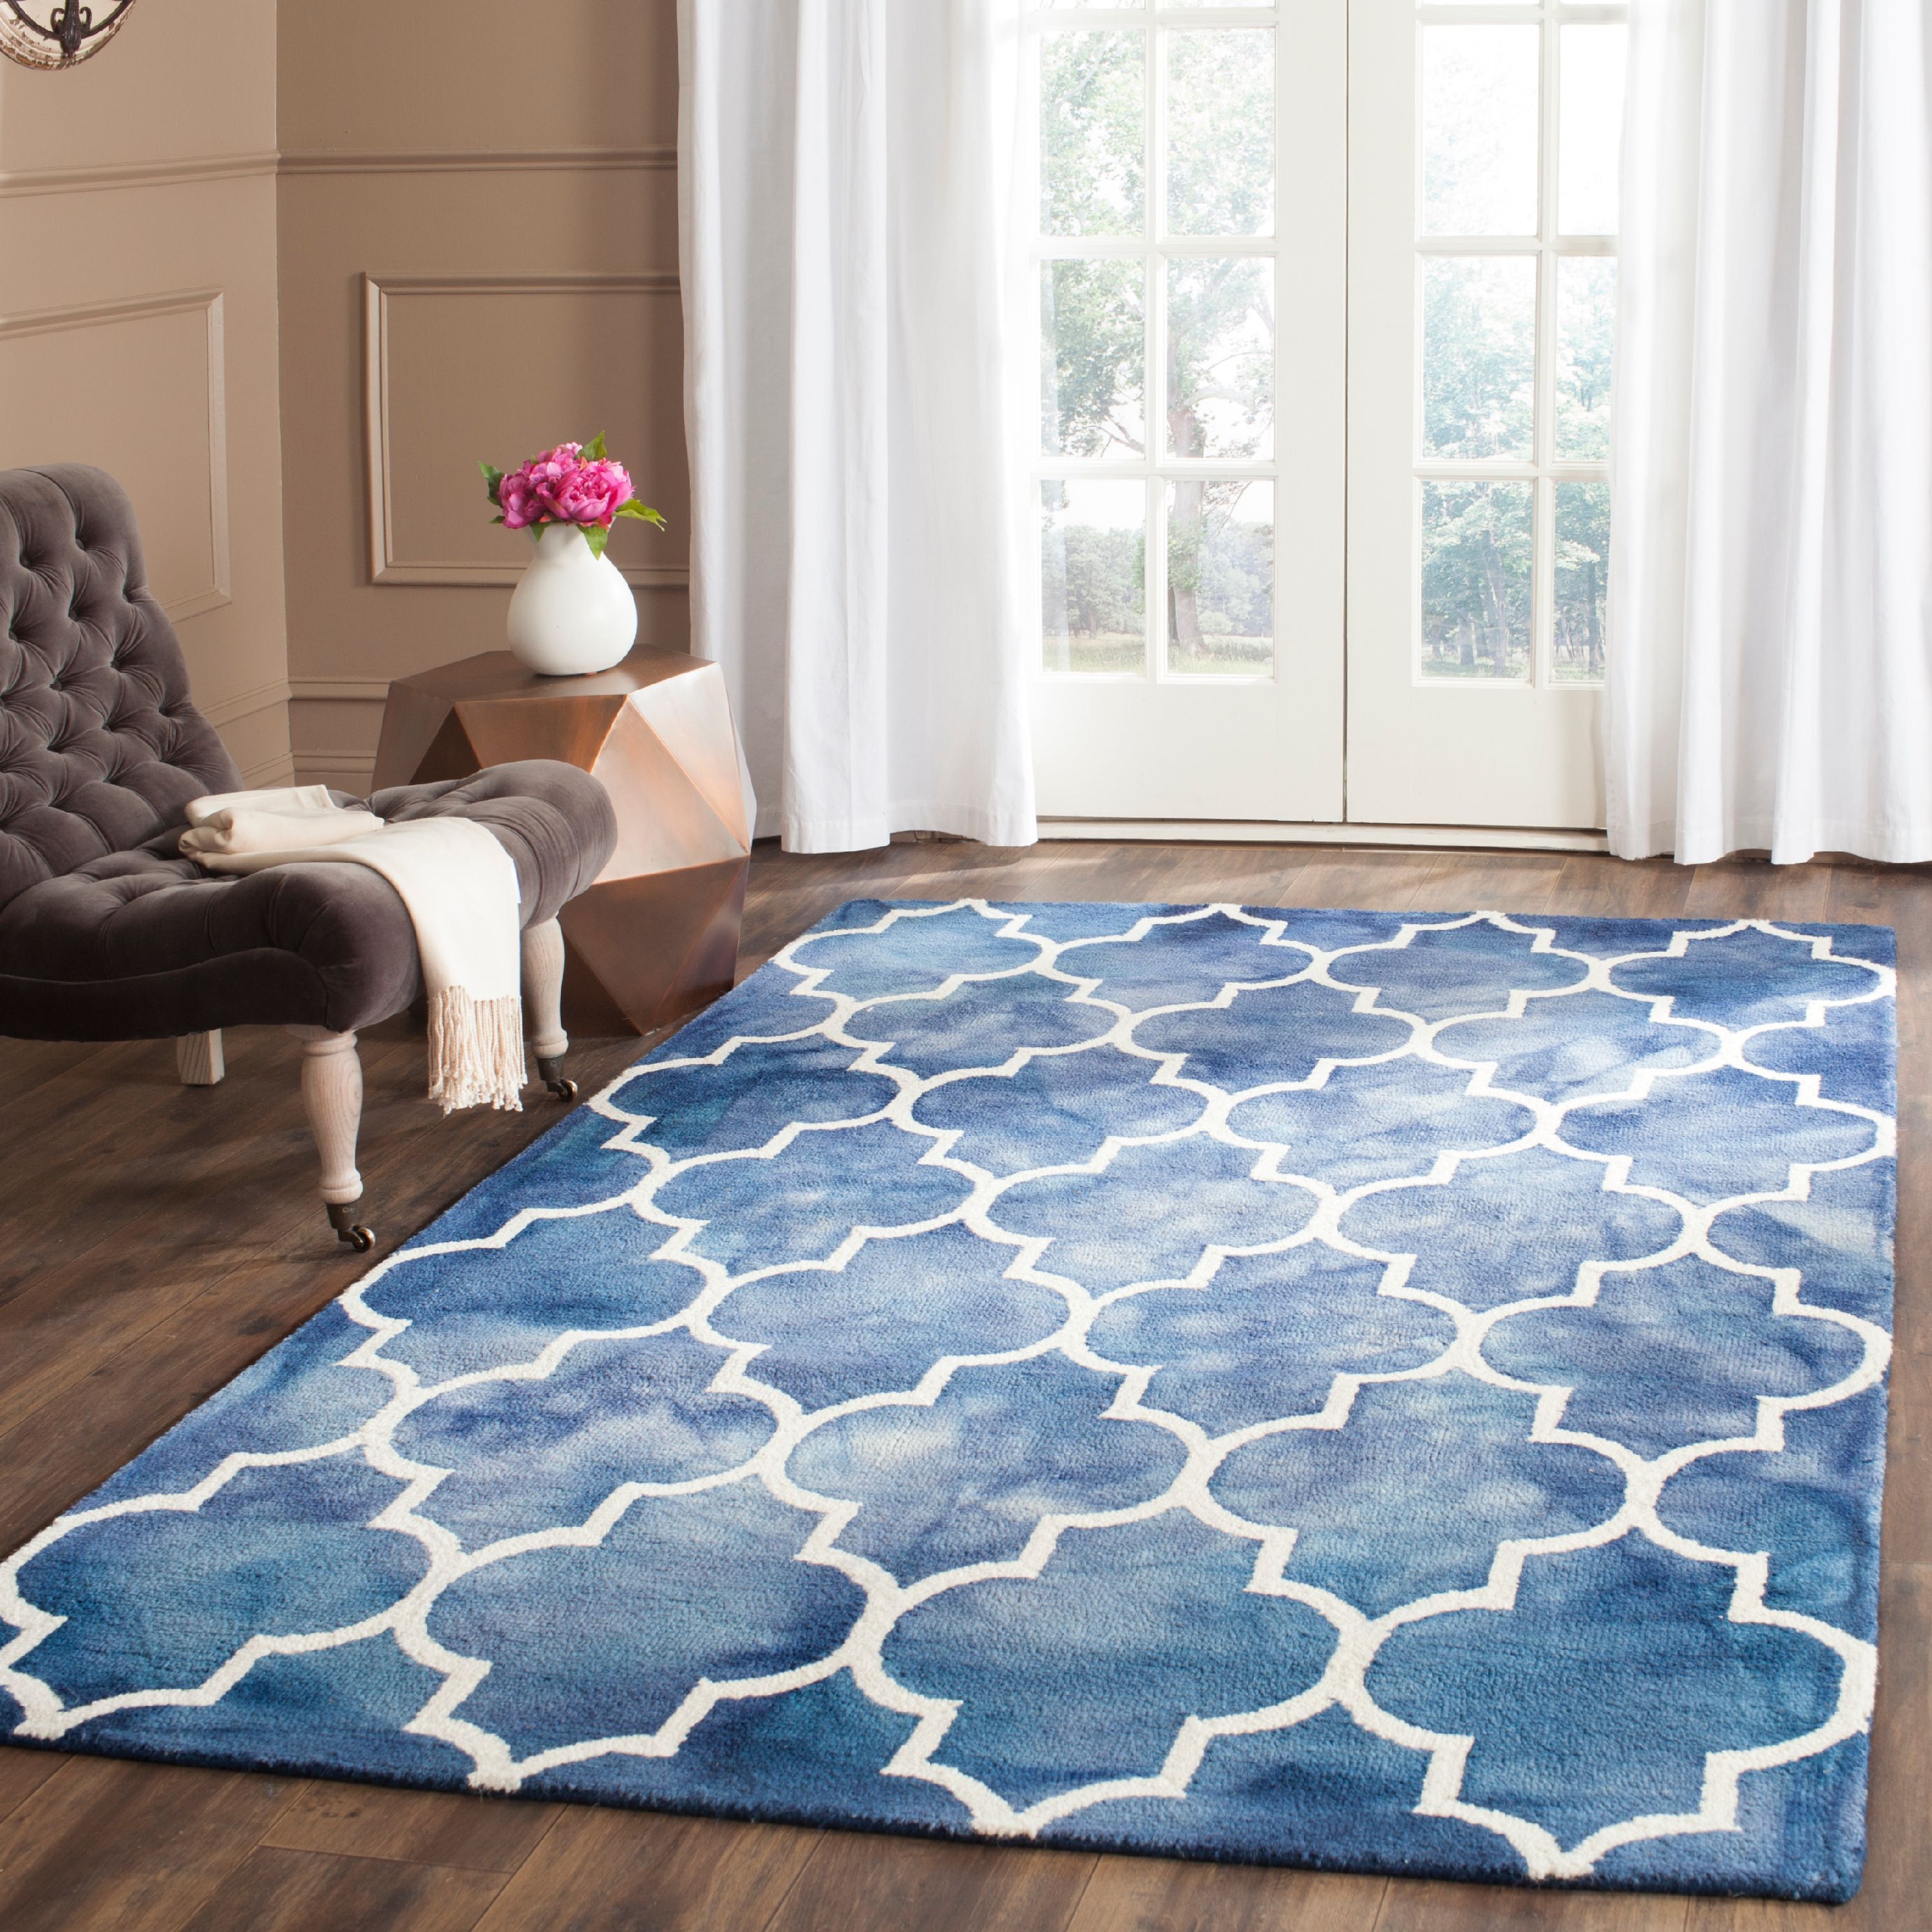 Navy and Ivory Hand-Tufted Wool 9' x 12' Area Rug